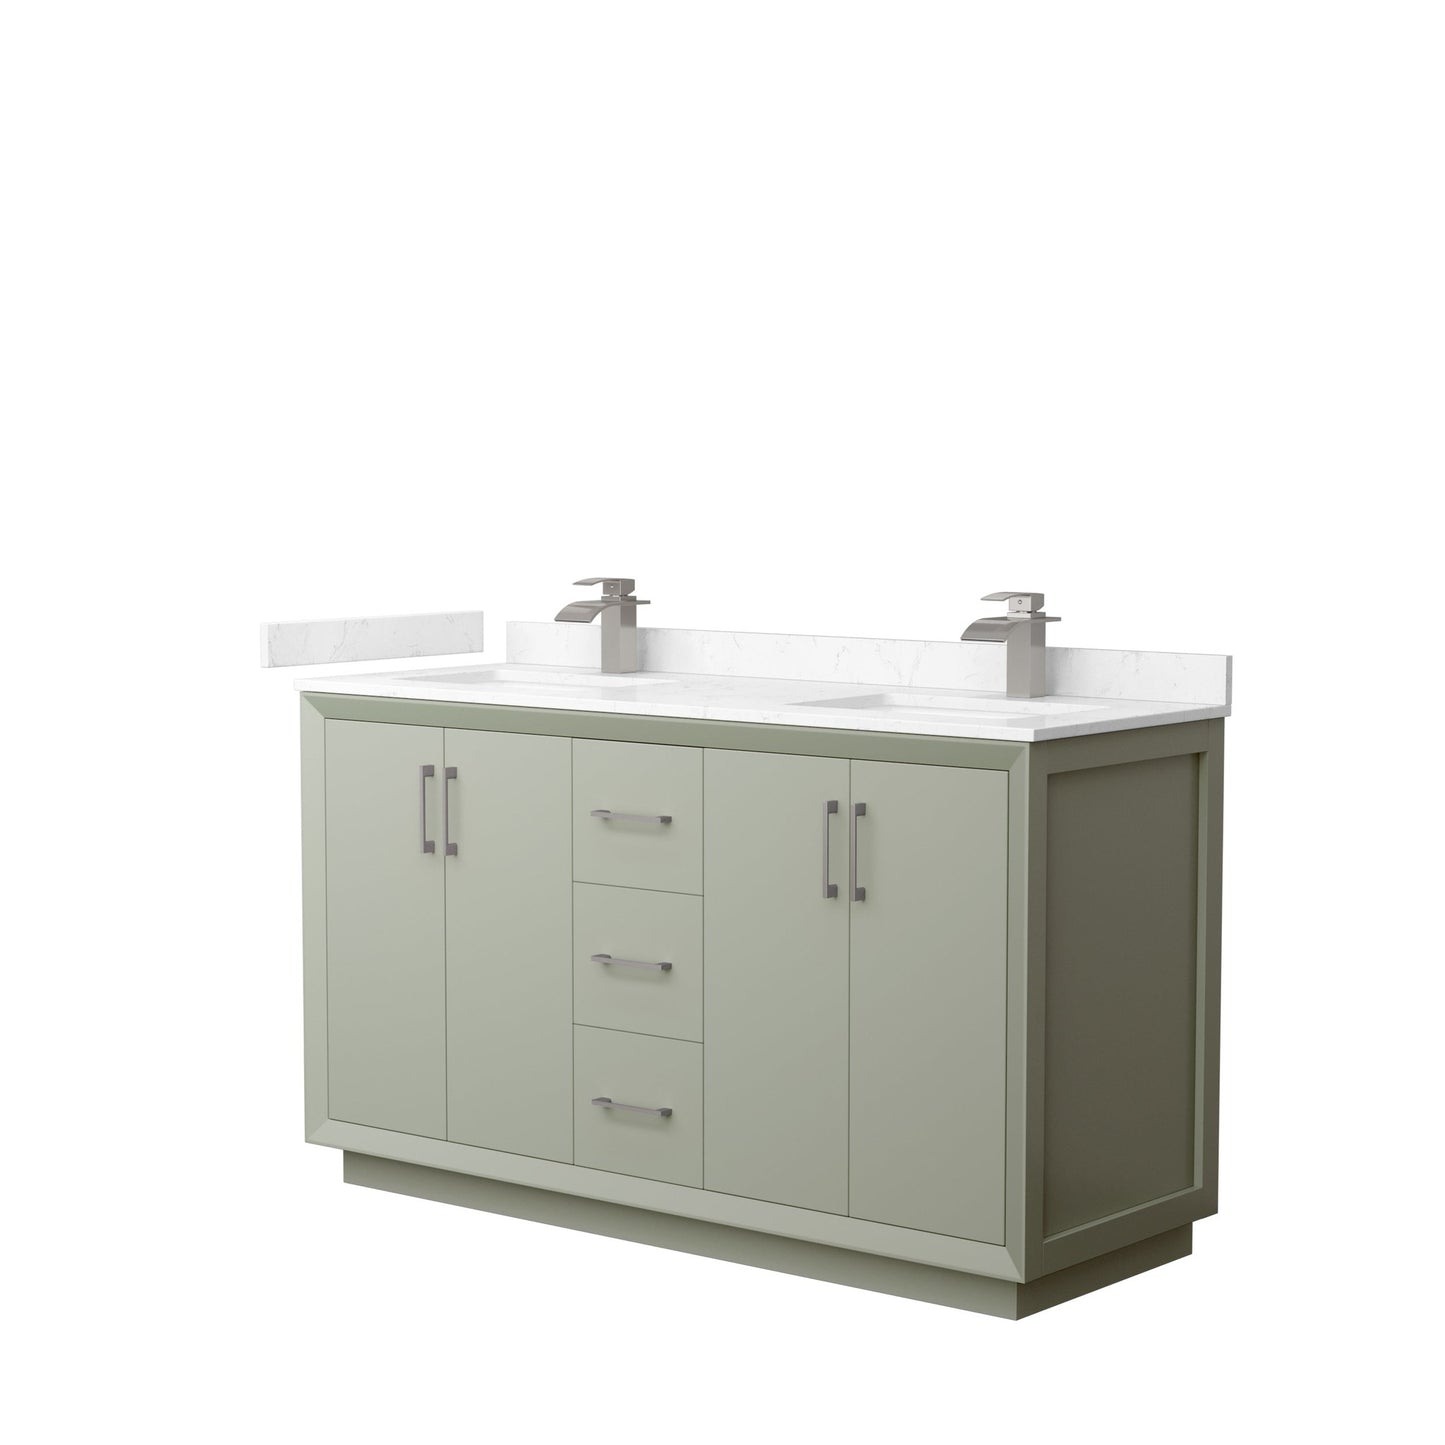 Wyndham Collection Strada 60" Double Bathroom Vanity in Light Green, Carrara Cultured Marble Countertop, Undermount Square Sinks, Brushed Nickel Trim